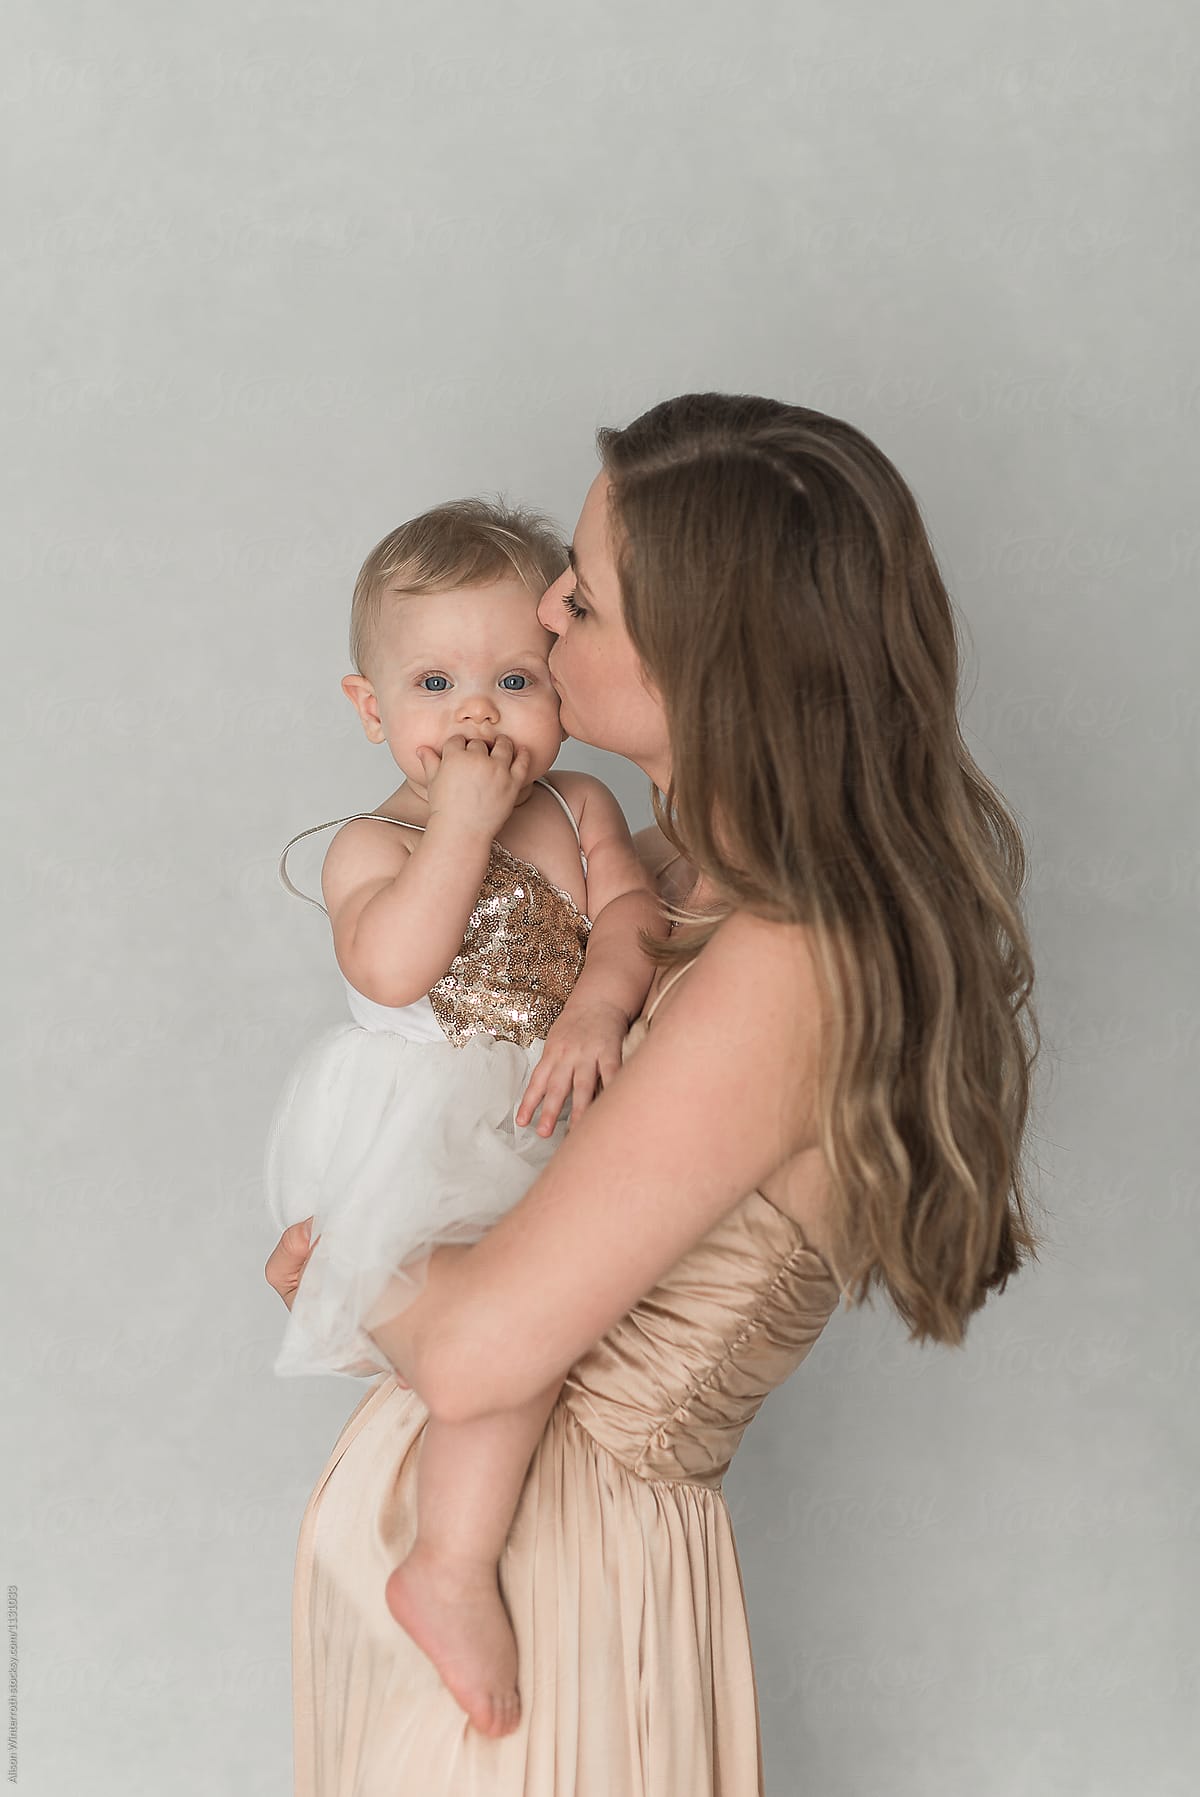 Mother Kissing Her Daughter By Stocksy Contributor Alison Winterroth Stocksy